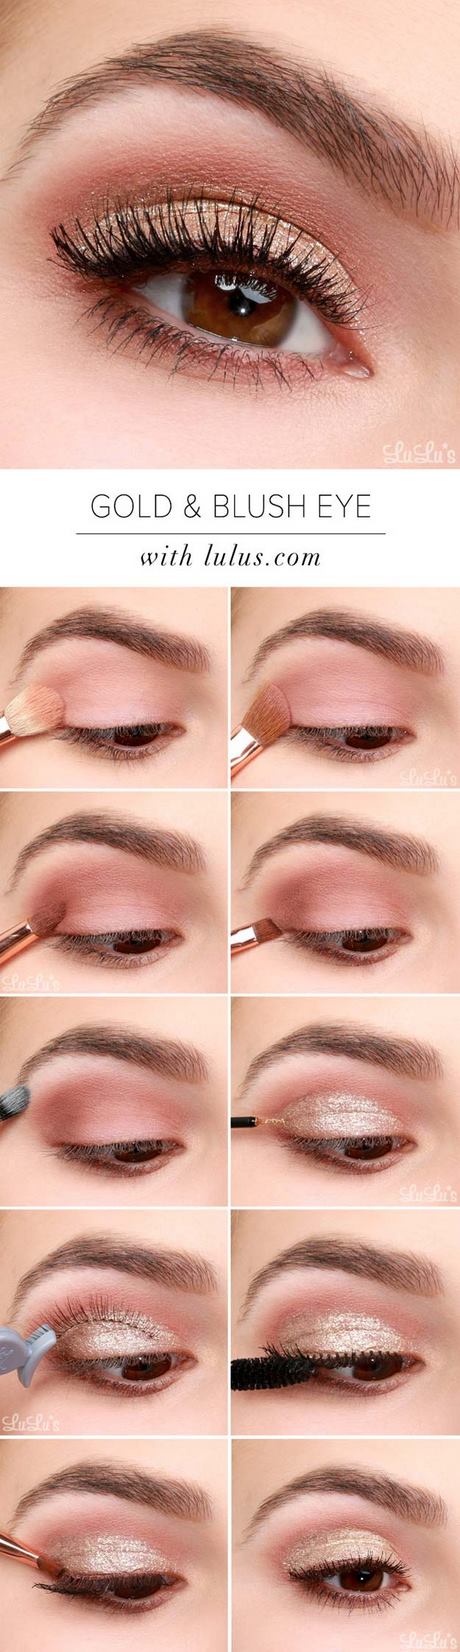 makeup-tips-with-pictures-46_6 Make-up tips met foto  s